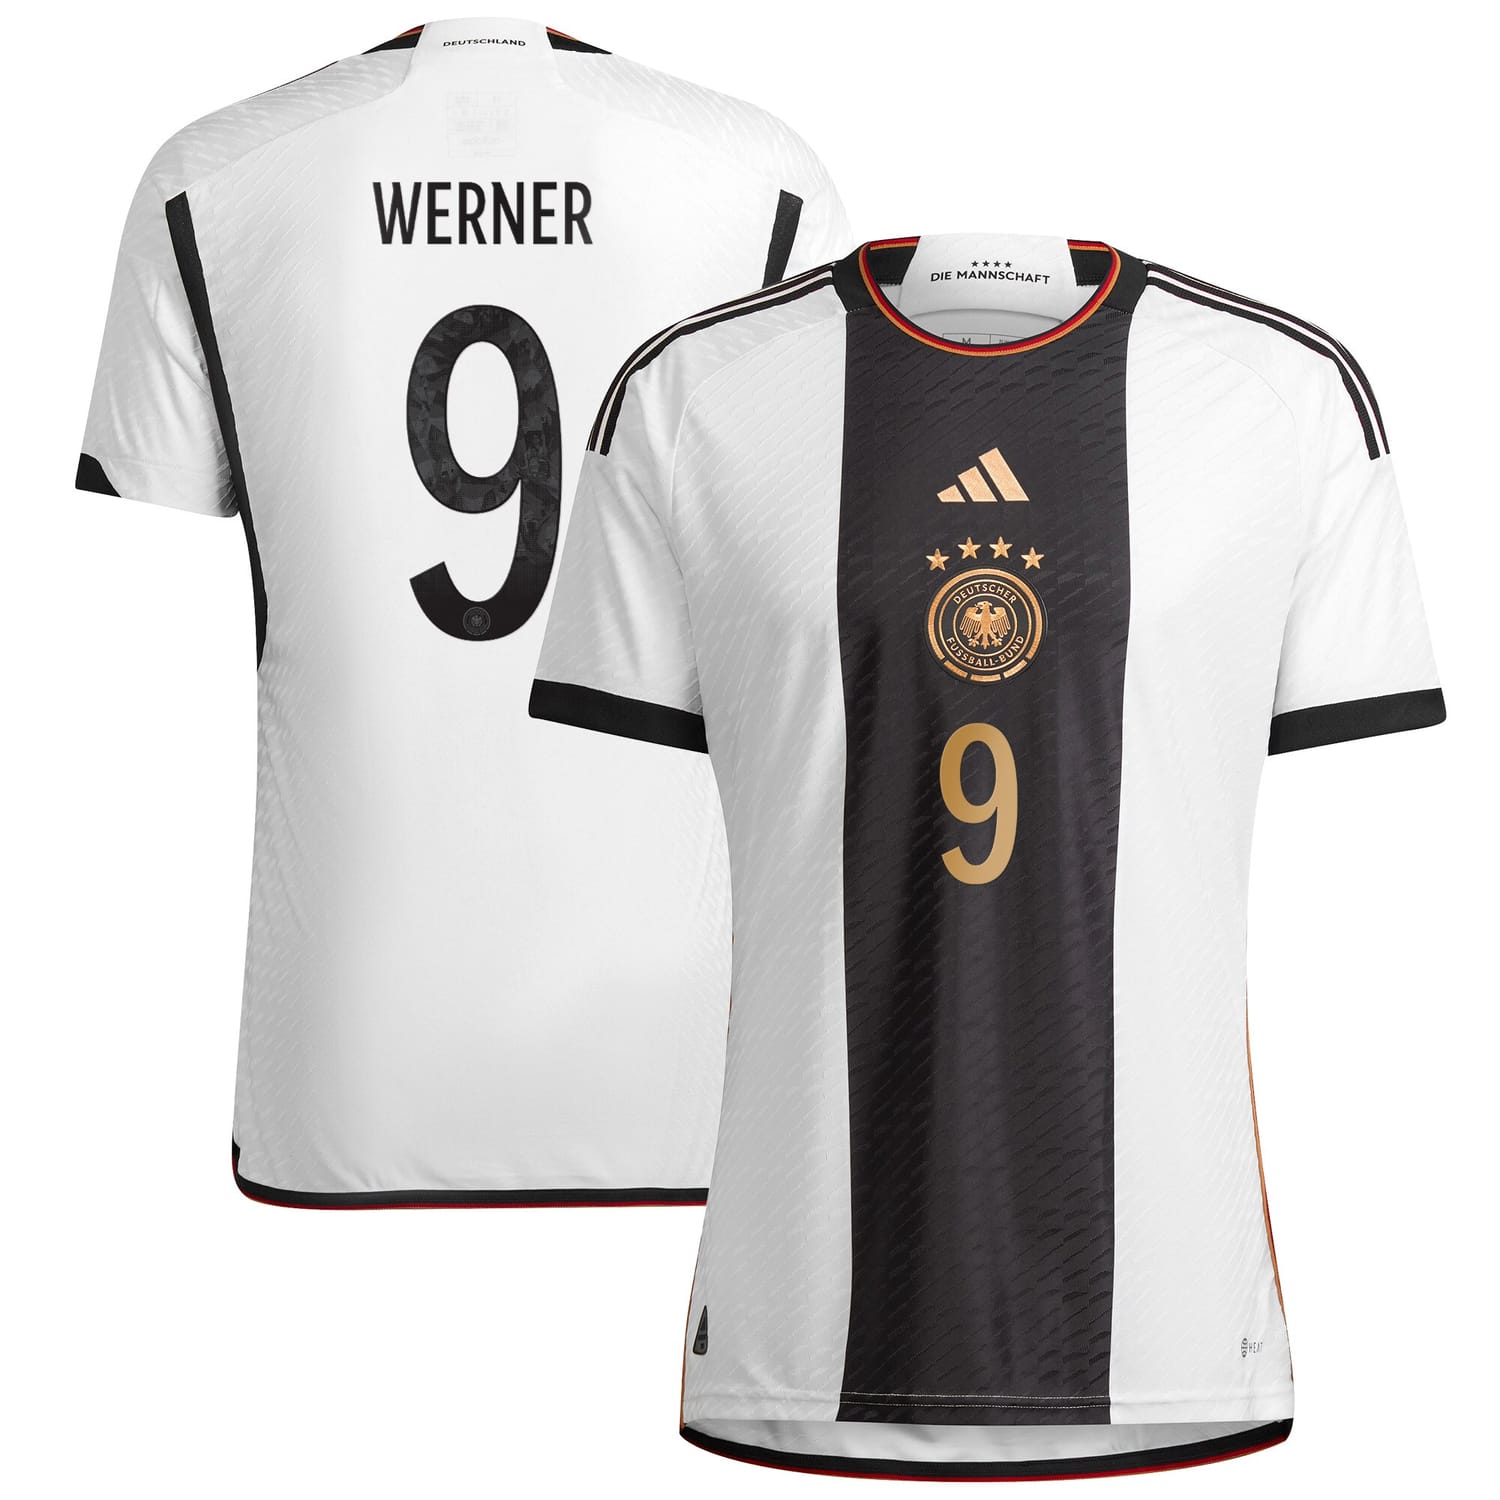 Germany National Team Home Authentic Jersey Shirt White 2022-23 player Timo Werner printing for Men